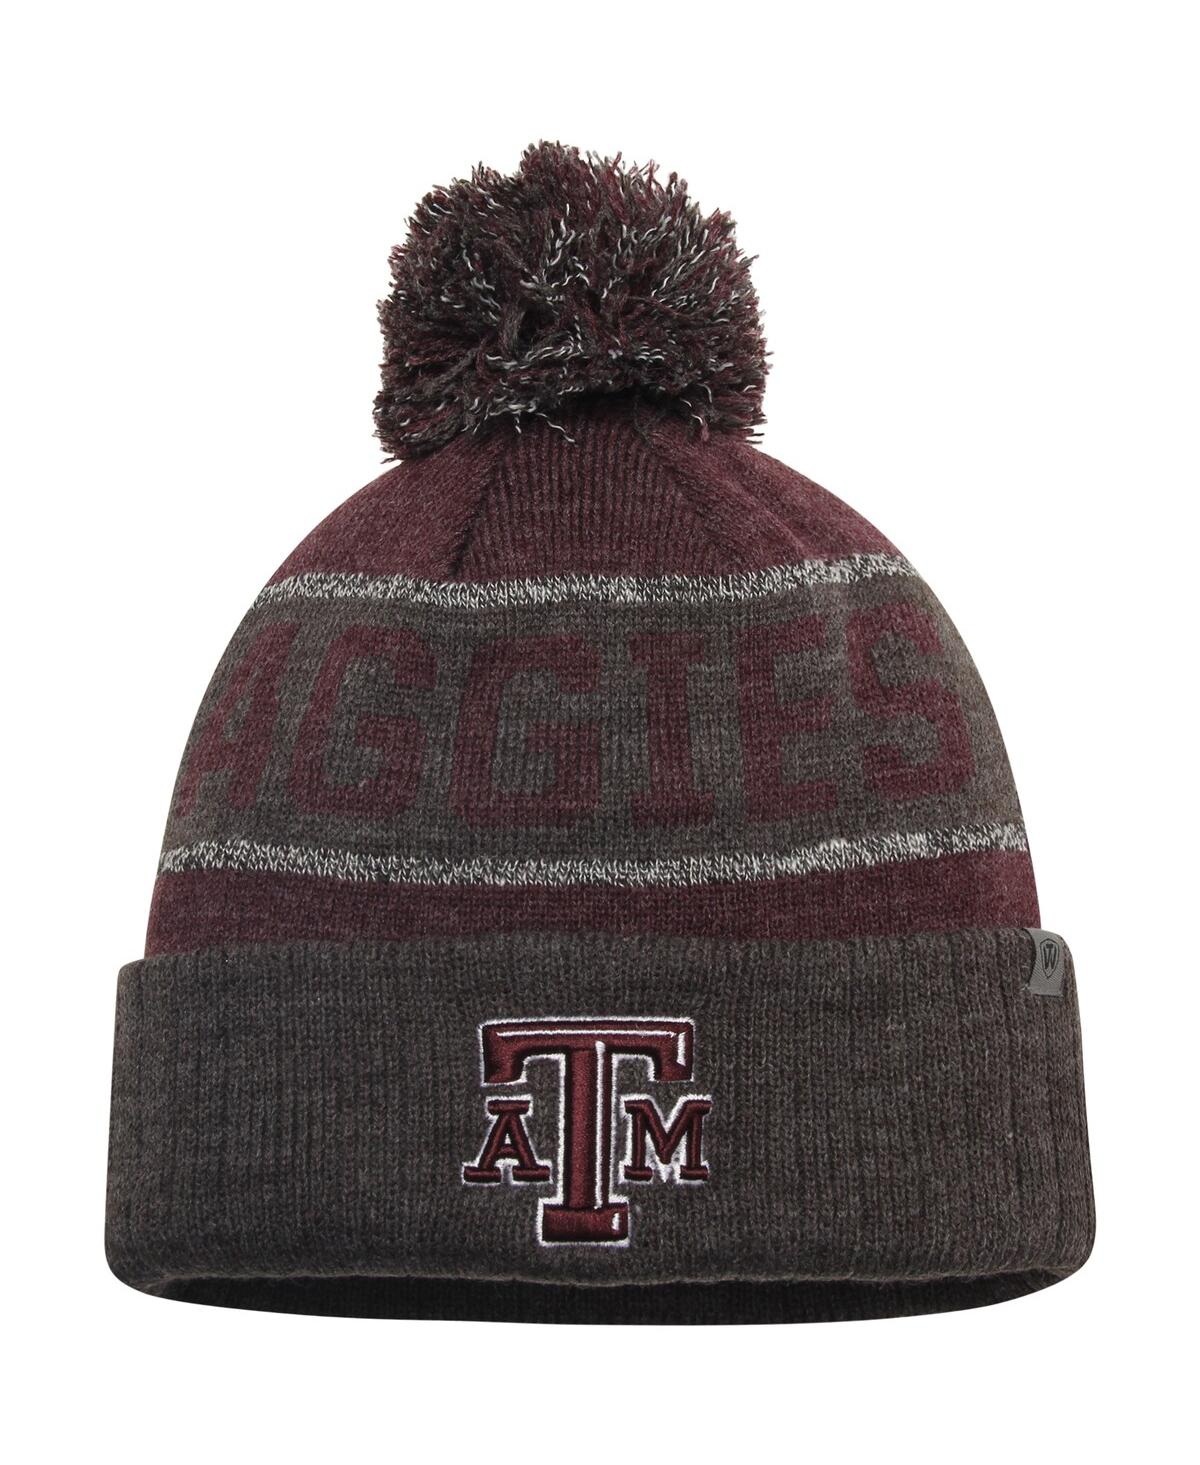 Top Of The World Men's Maroon And Heather Charcoal Texas A&m Aggies Below Zero Cuffed Pom Knit Hat In Maroon,heather Charcoal